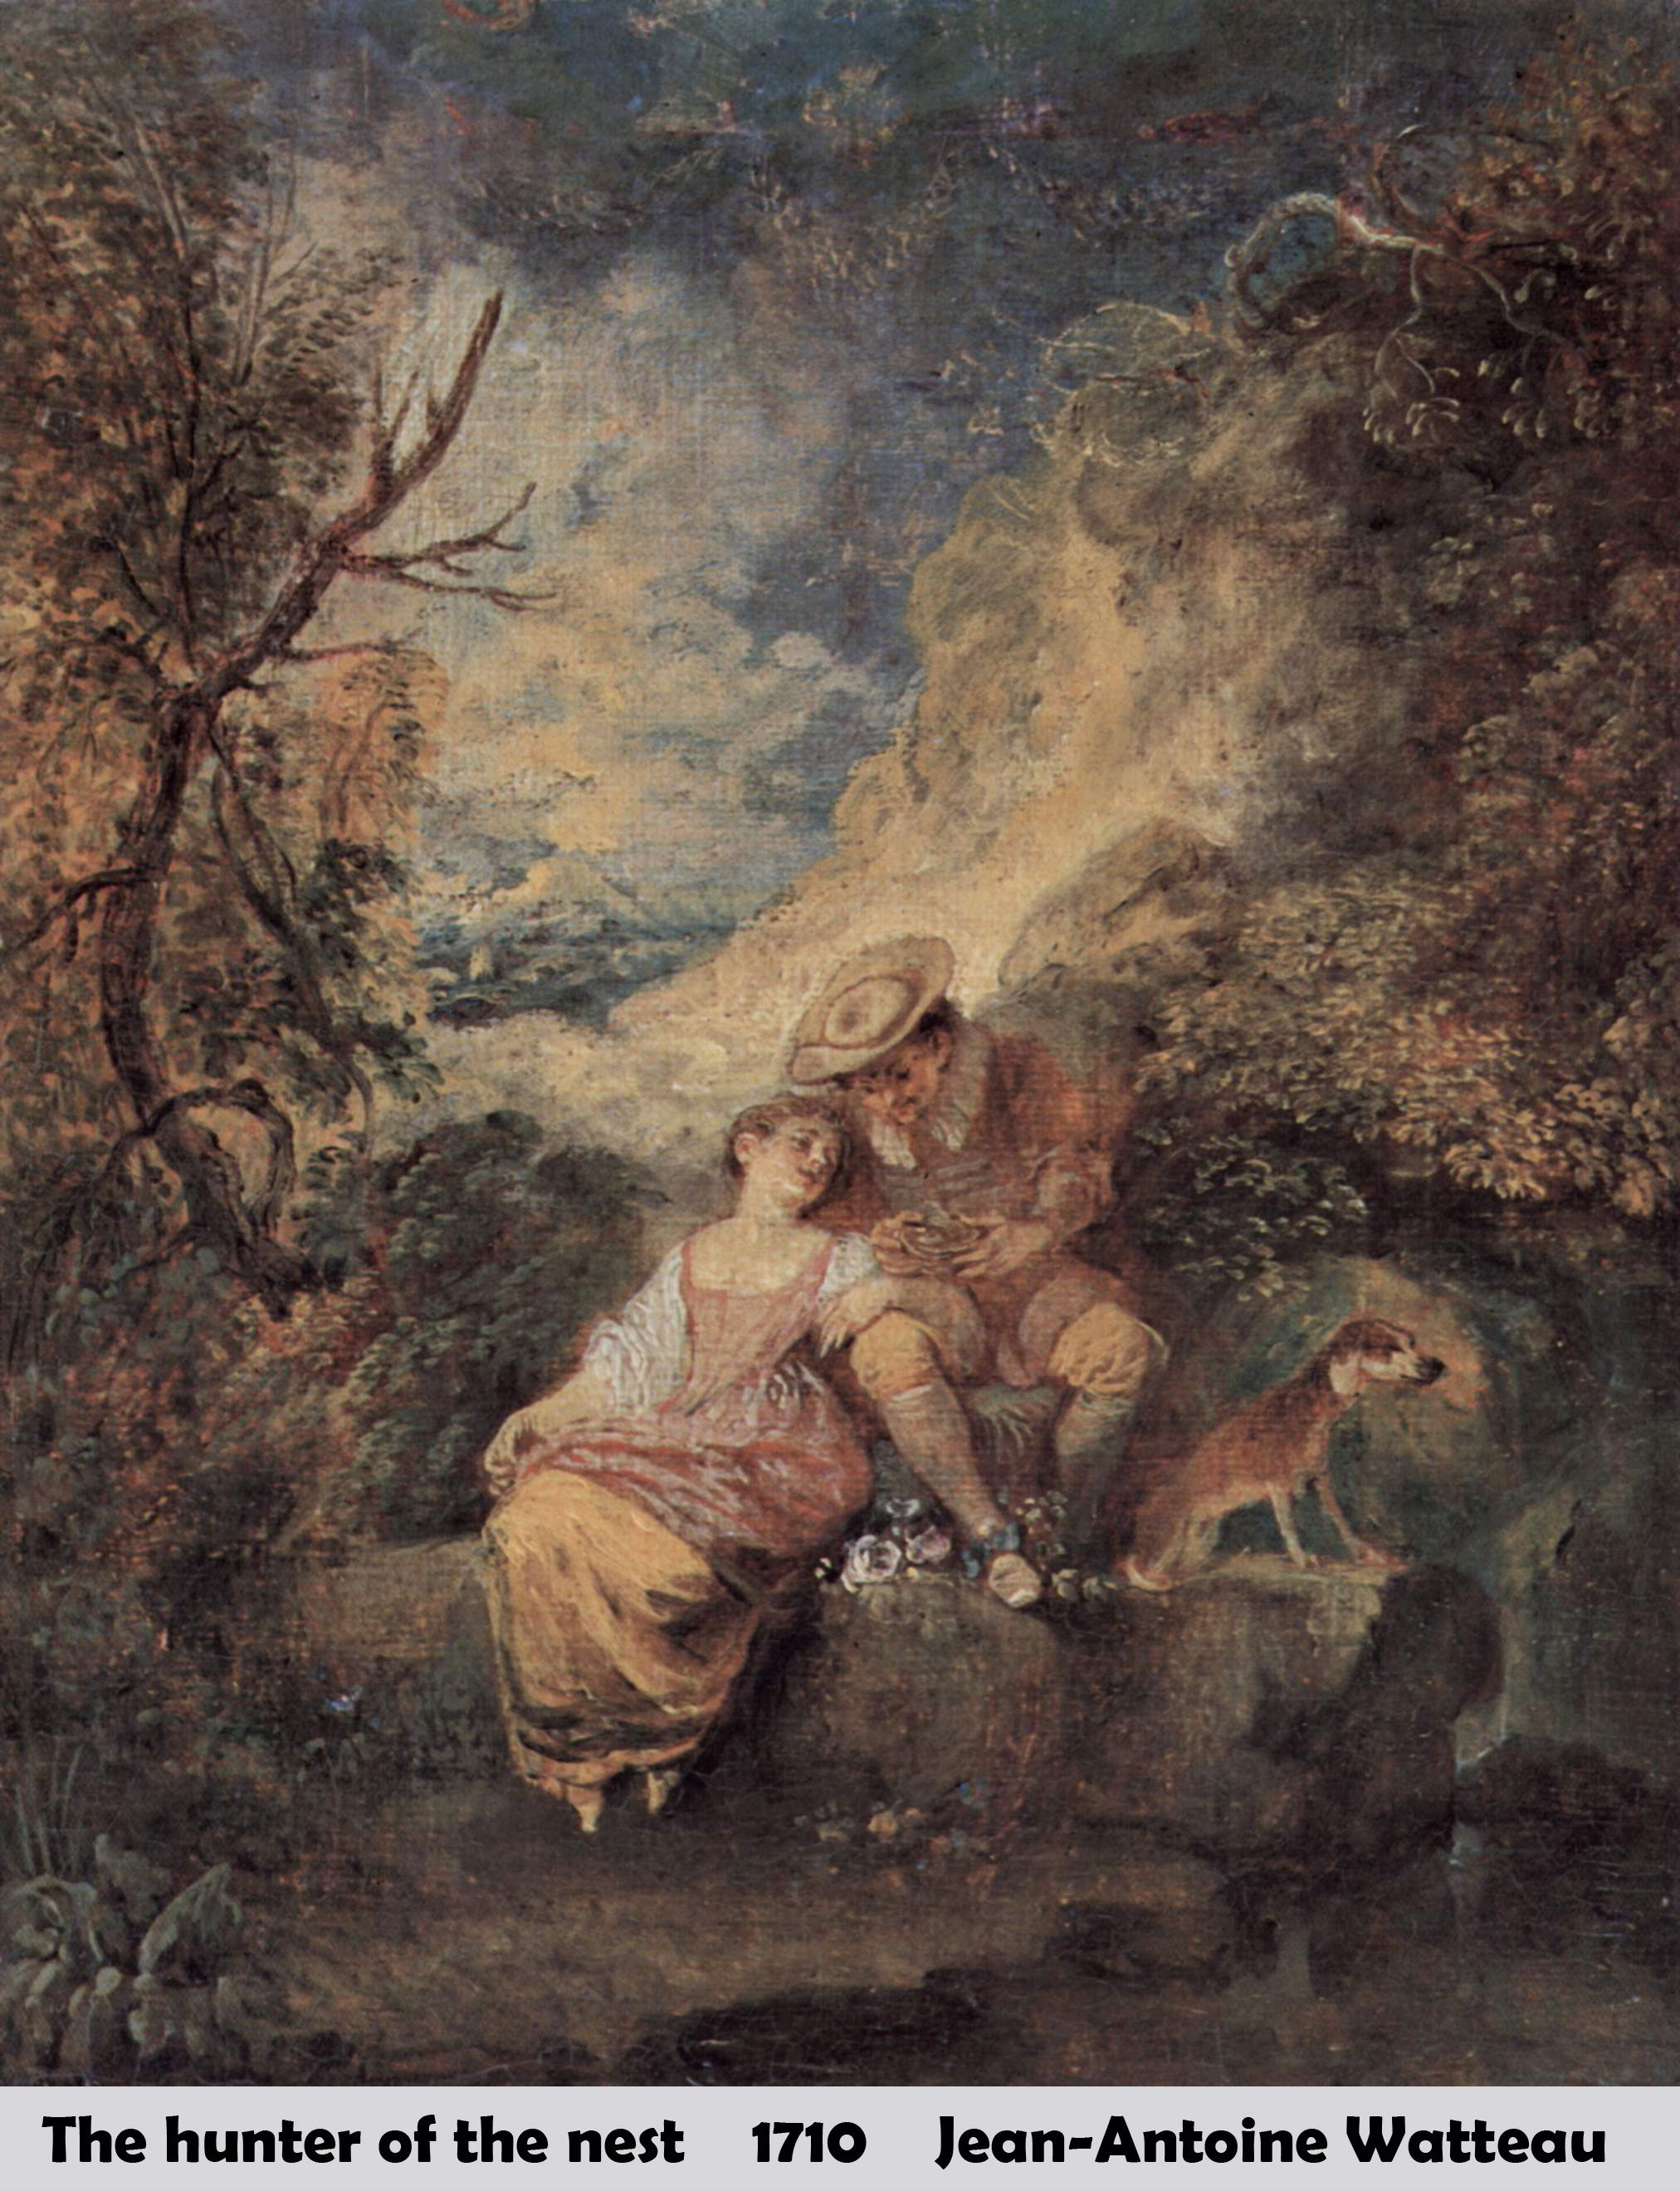 The hunter of the nest by Jean-Antoine Watteau-French Painting